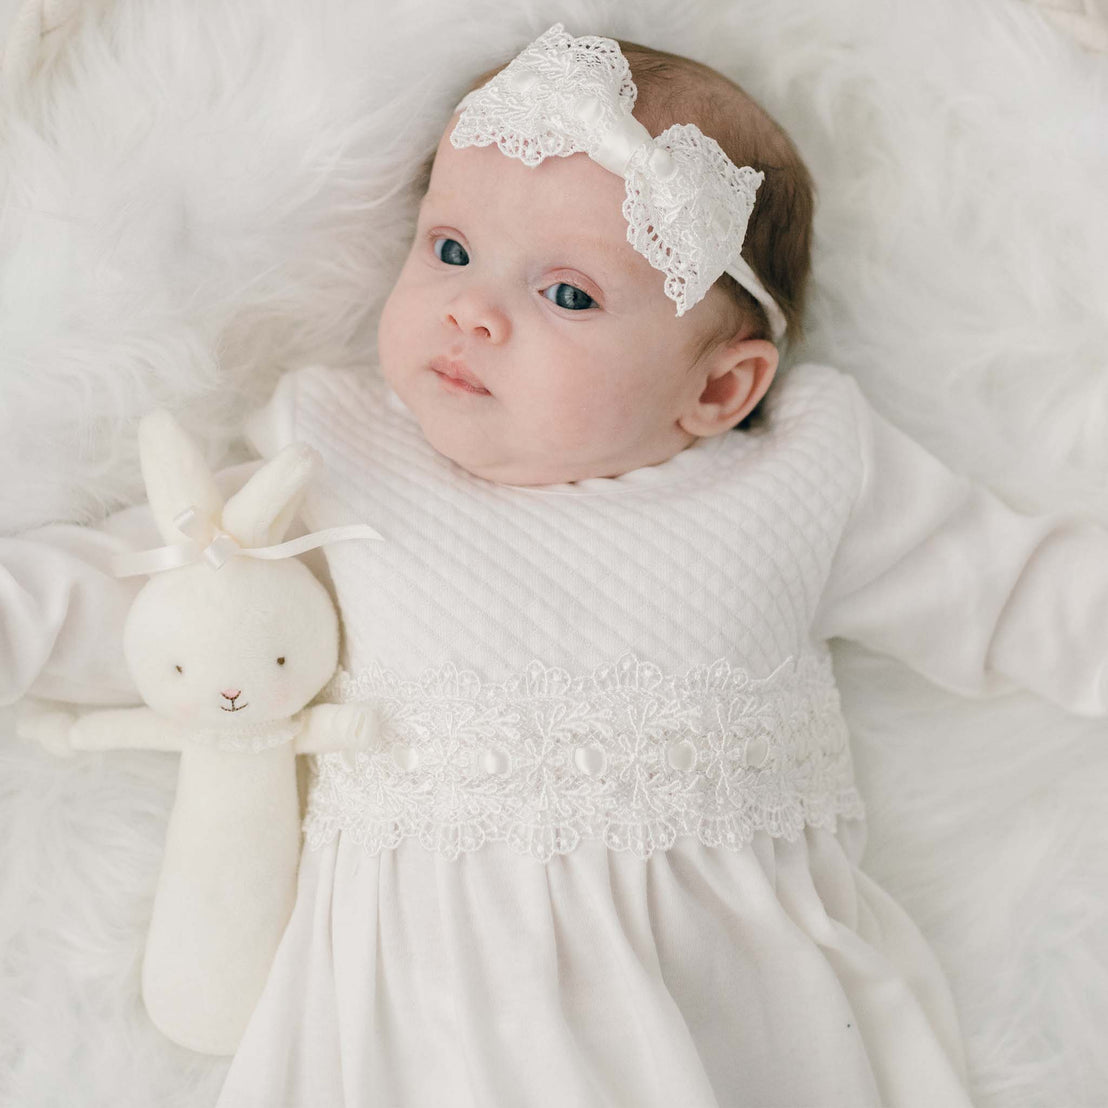 A newborn baby wearing a Madeline Newborn Gown lies on a furry blanket, gazing upward, holding a soft bunny toy, the perfect upscale baby gift from our boutique.